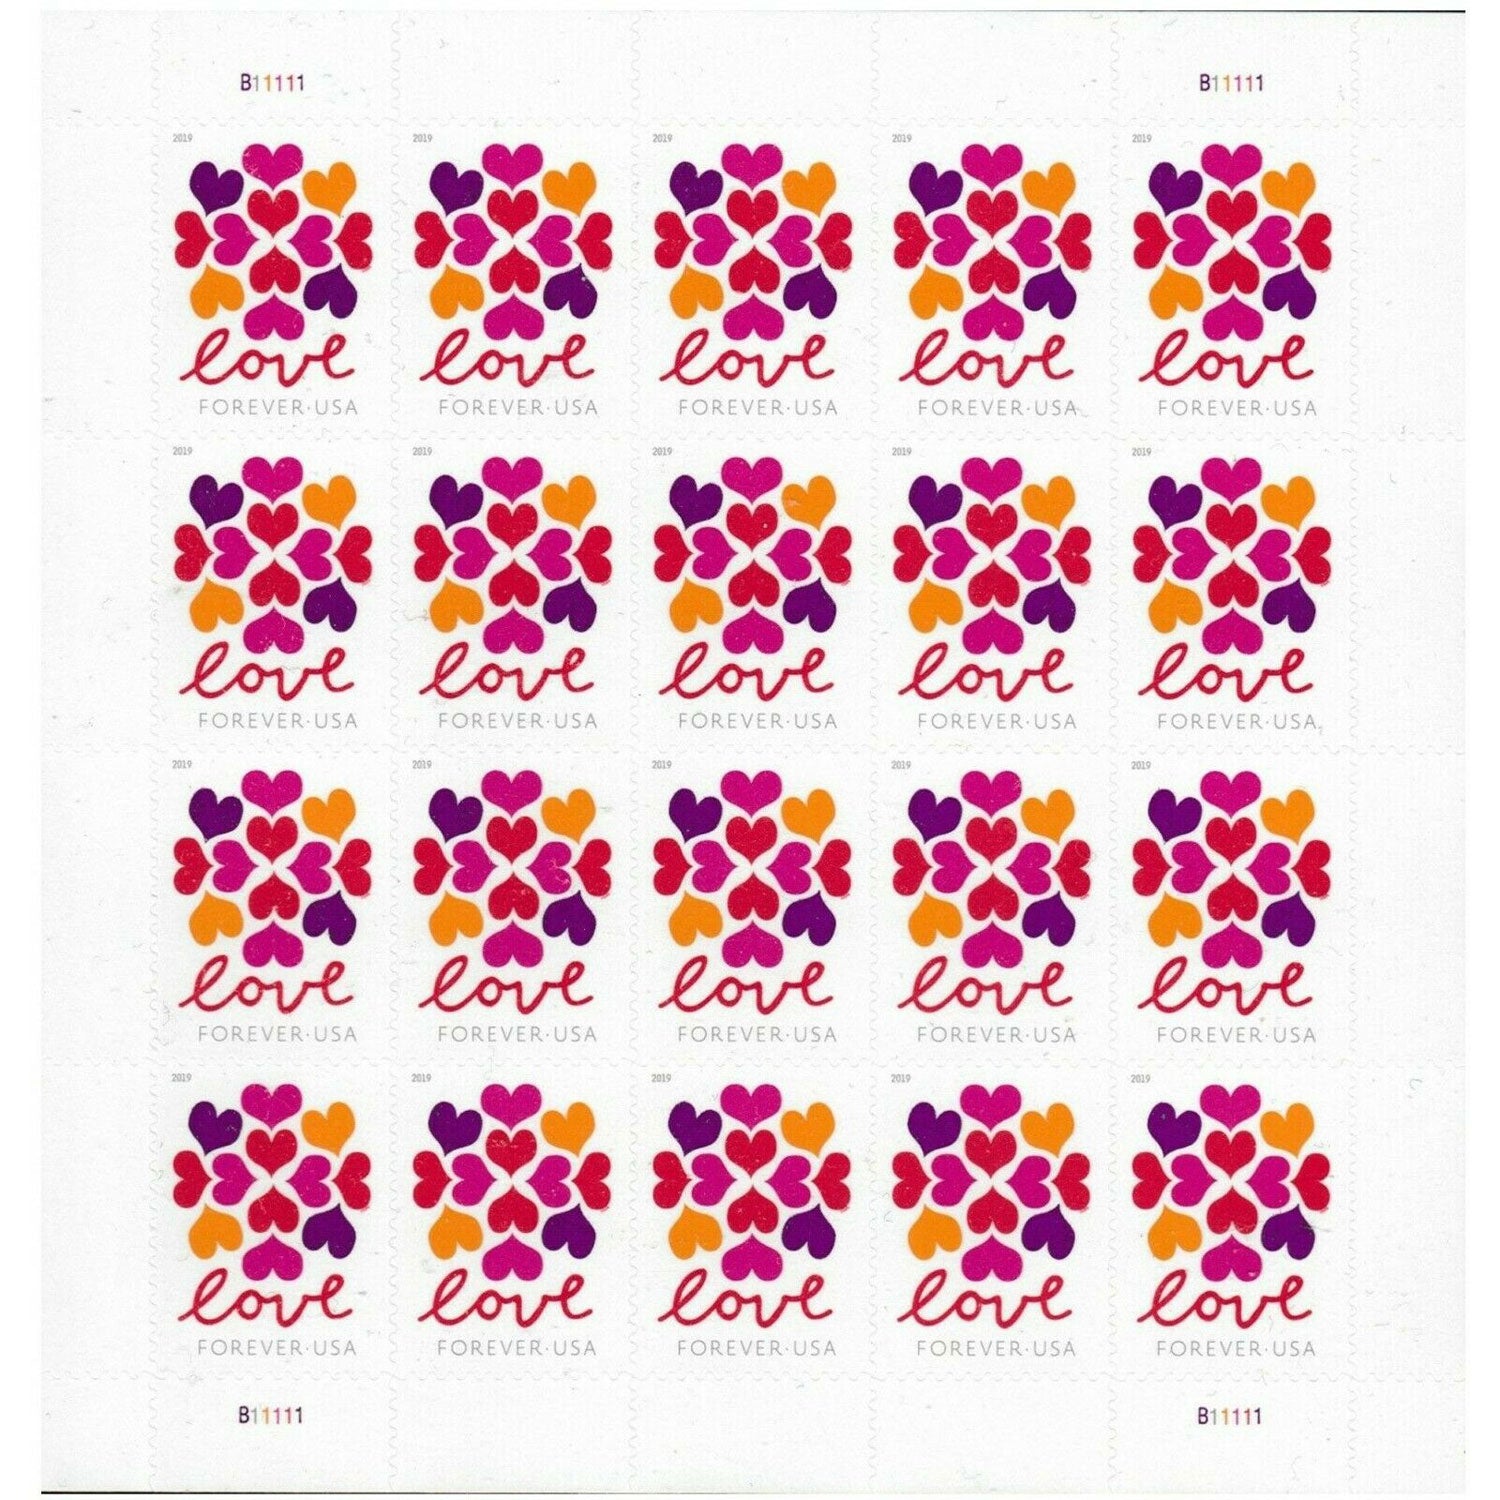 Love Heart Blossom Forever First Class Poatage Stamps｜us postage forever